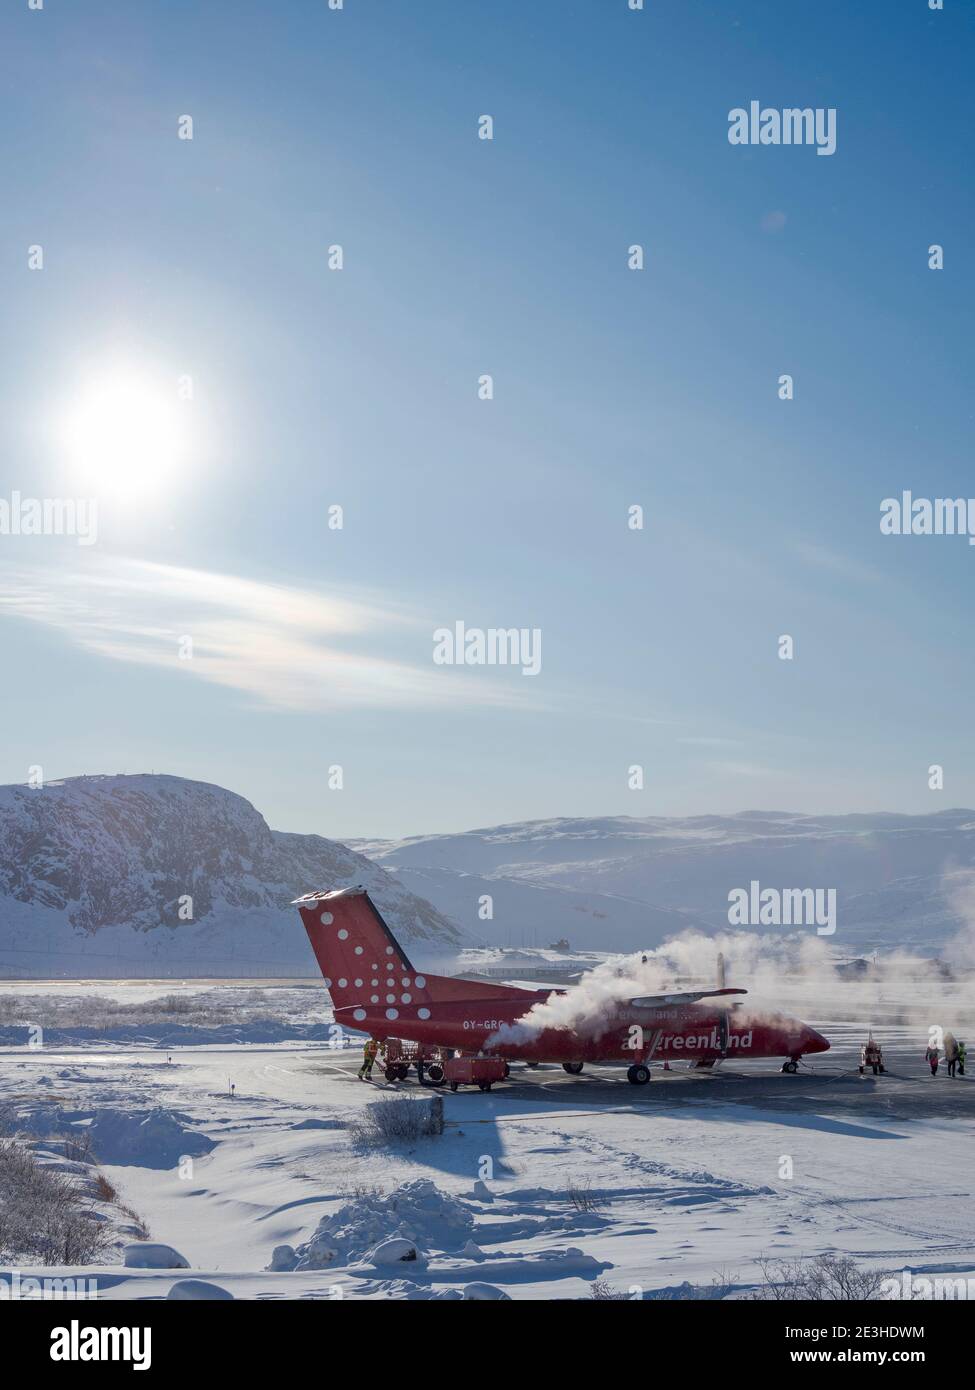 Kangerlussuaq airport during winter, the hub for all flights in Greenland. America, North America, Greenland Stock Photo